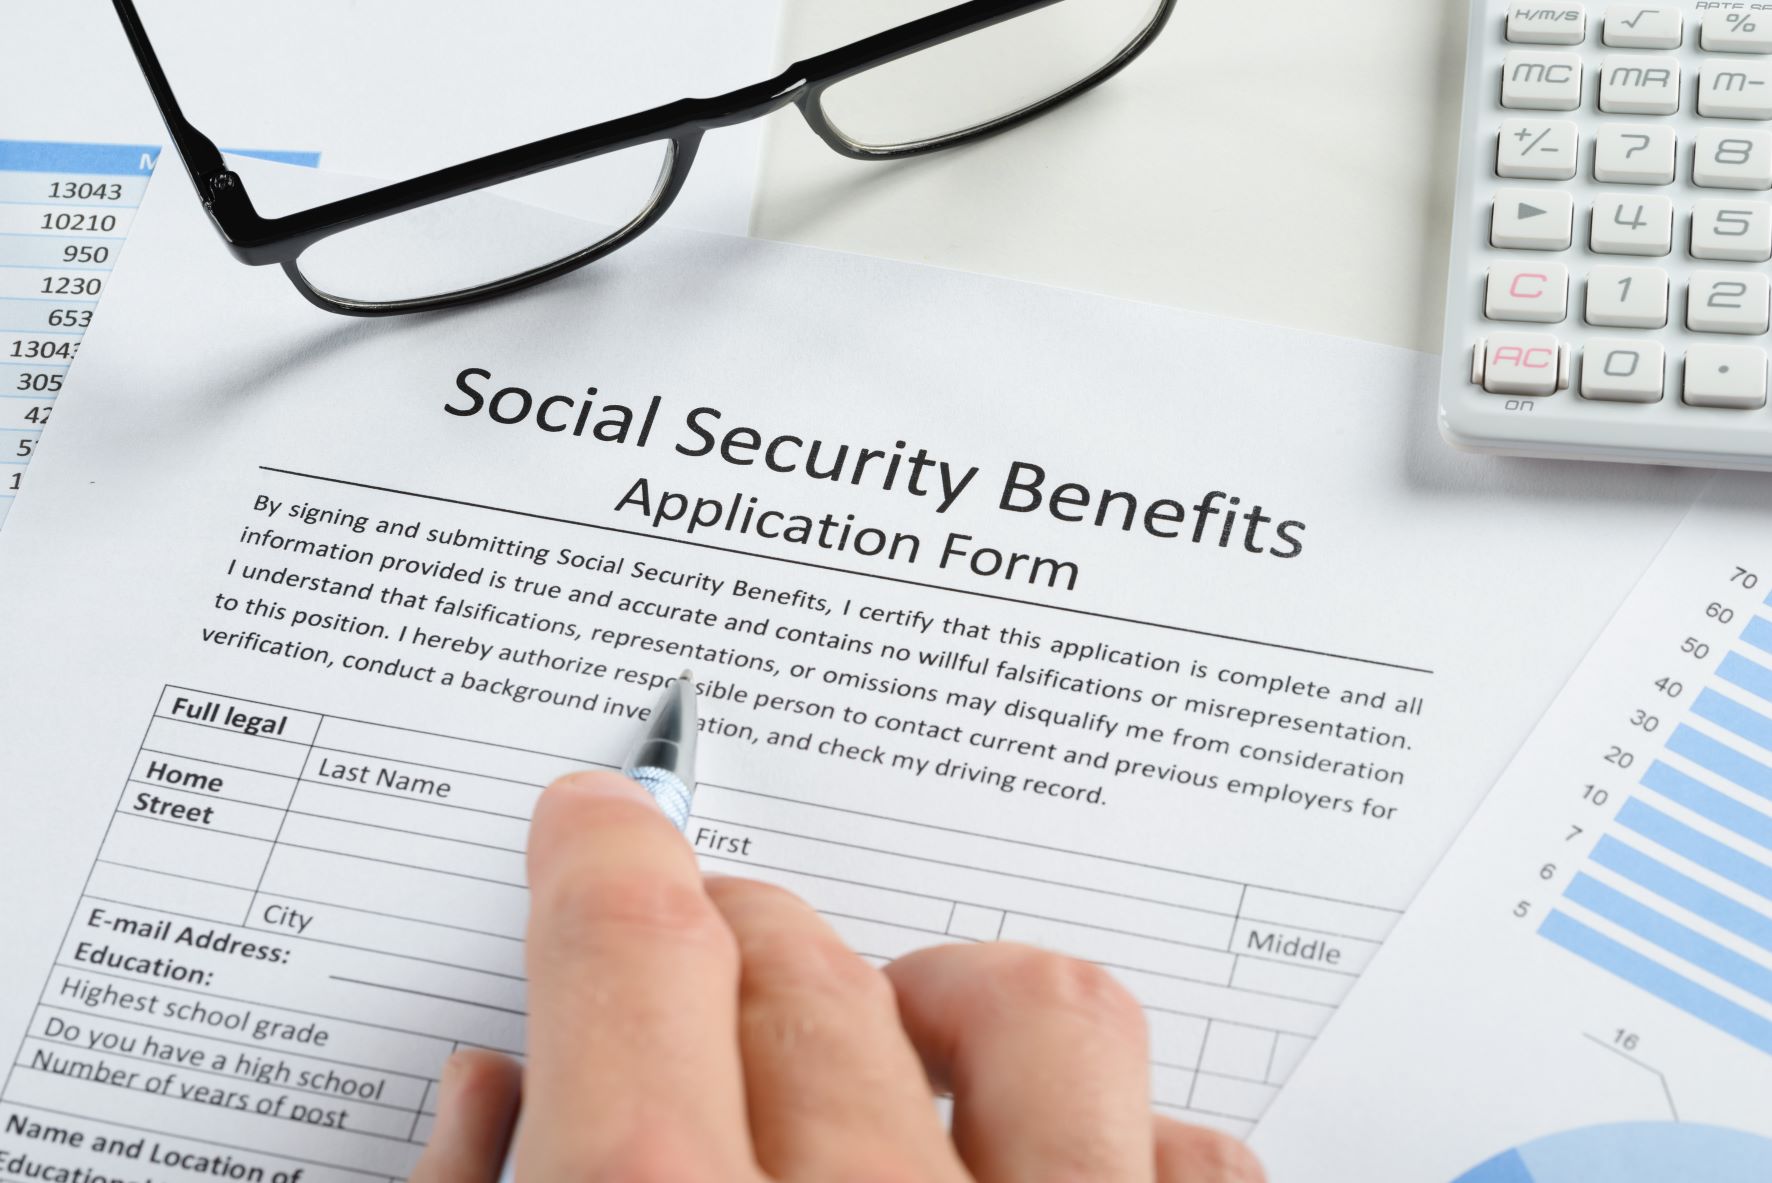 Don’t Take Social Security at the Wrong Time